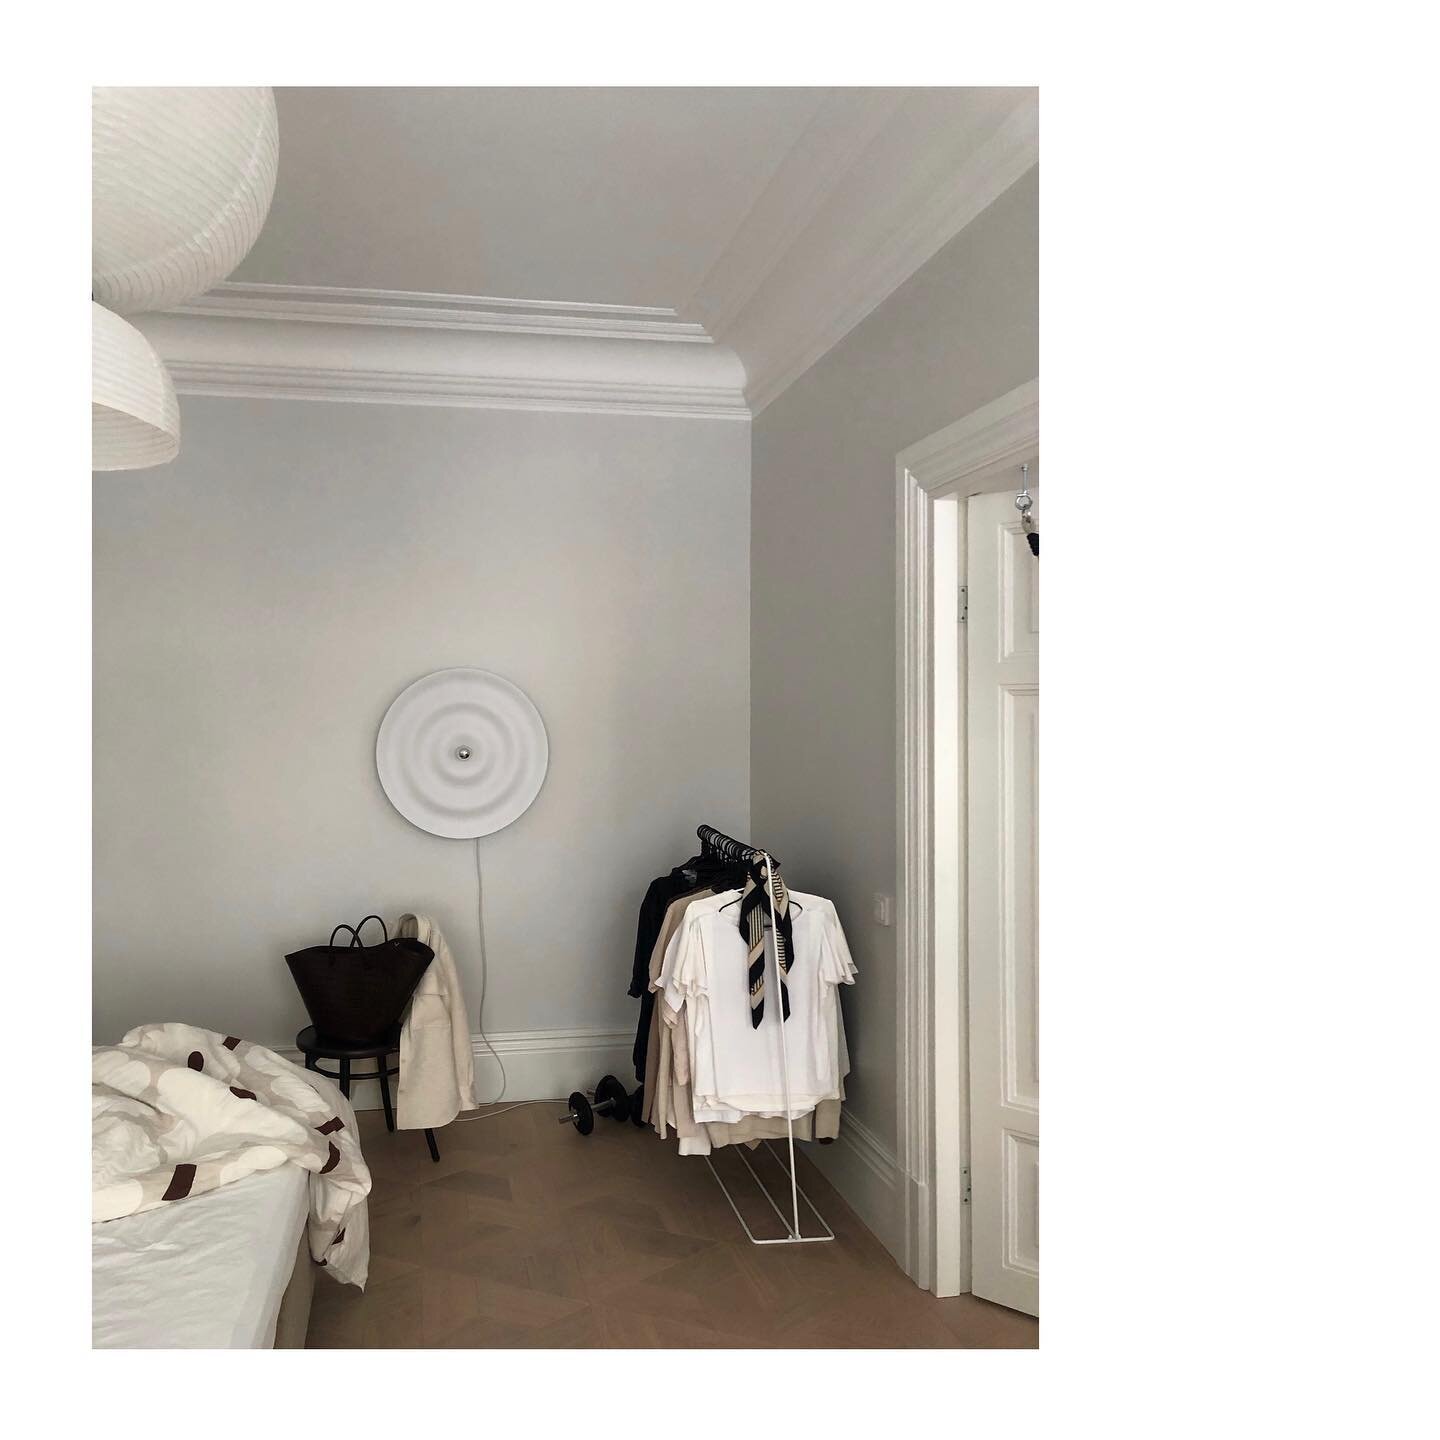 Relaxed bedroom corner captured spontaneously with a mobile 🙈
Btw I would need a new a bit more sturdy rack for the clothes. Let me know If you have any recommendations! 🙏🏻 
&bull;
&bull;
&bull;
&bull;
#almalight #myhome #ourhome #interior #interi